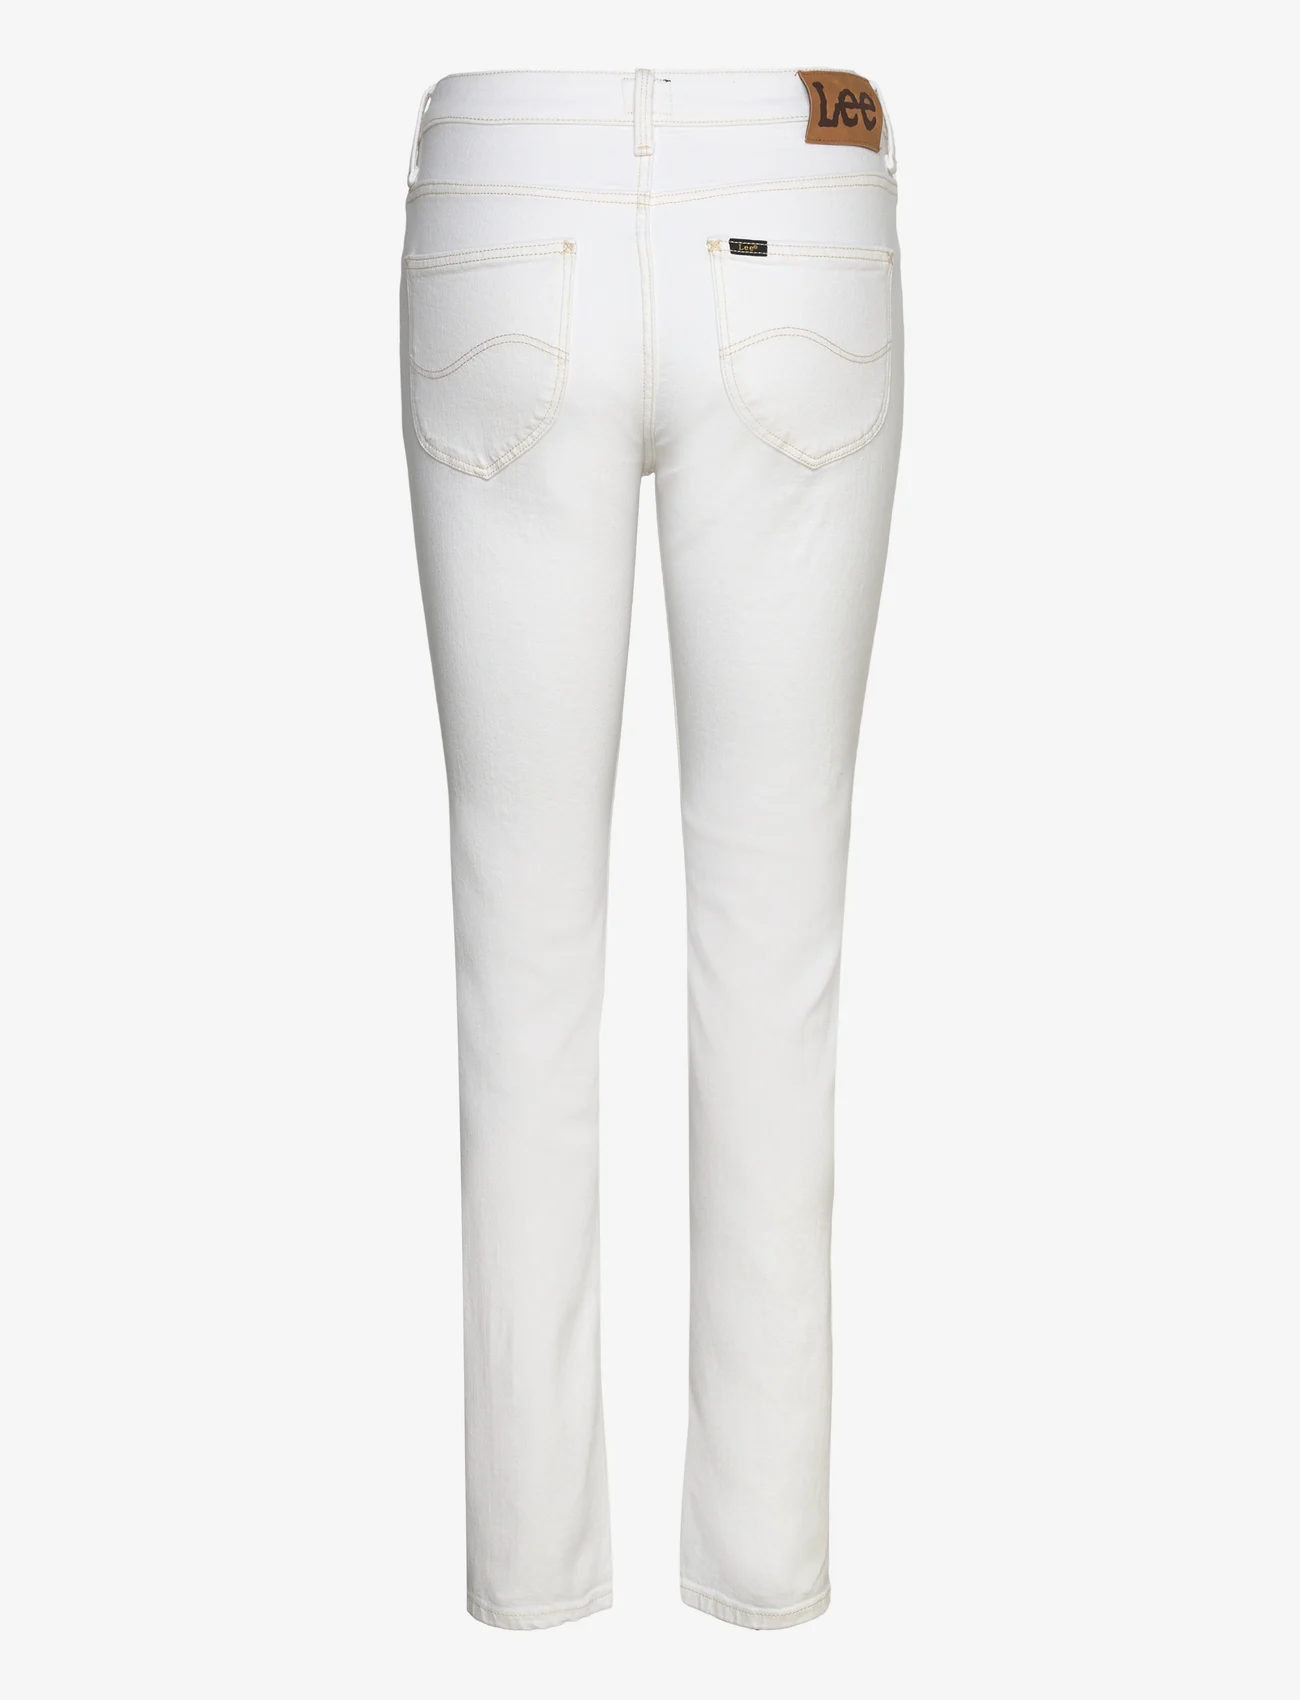 Lee Jeans - ELLY - slim fit jeans - illuminated white - 1